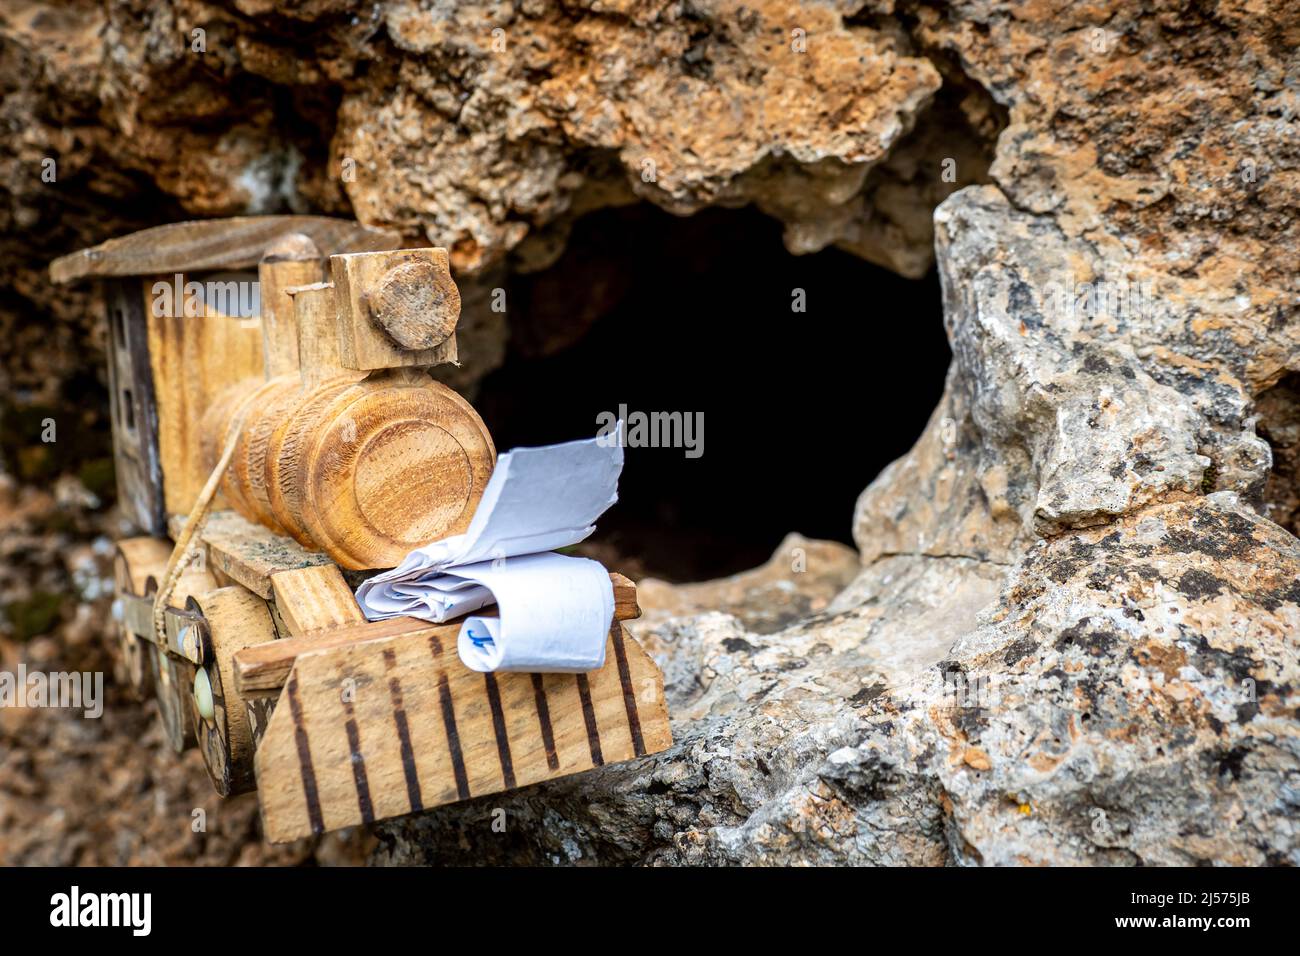 Arrangement of a successful geocaching discovery.  A crafted small toy locomotive geocaching container with a logbook inside hidden in a rock hole Stock Photo